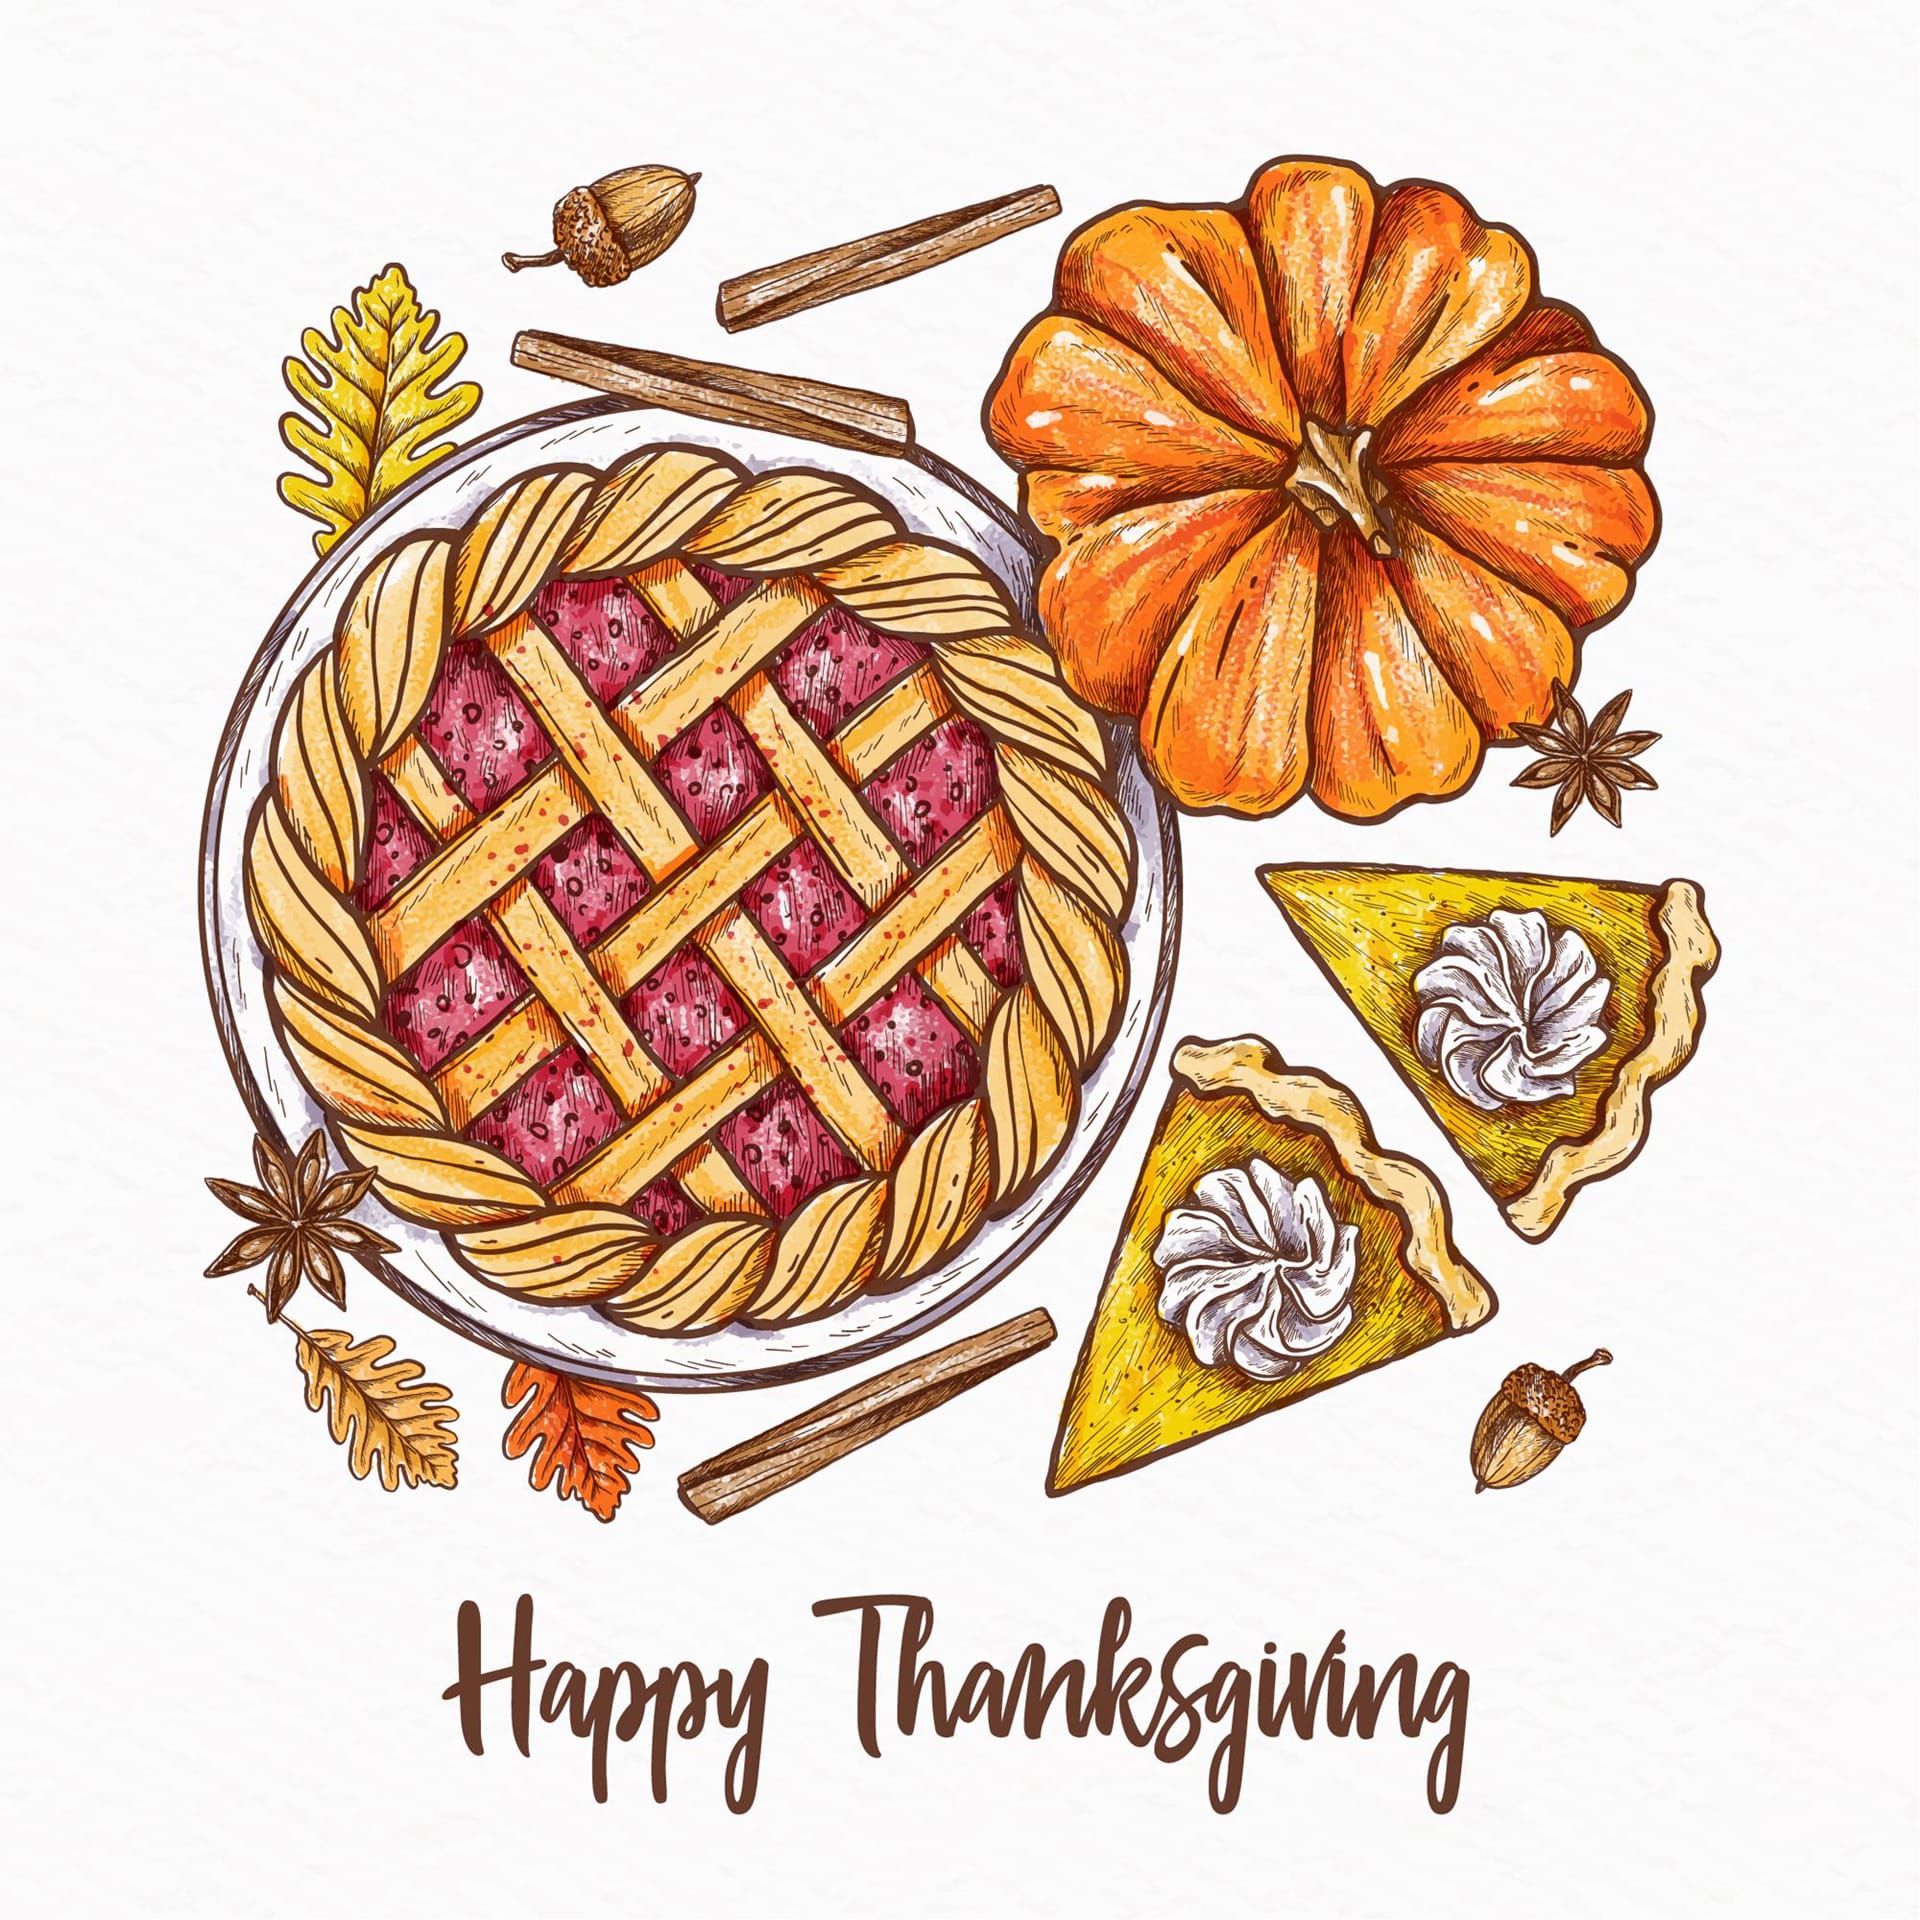 Pie hand drawn thanksgiving background happy thanksgiving images